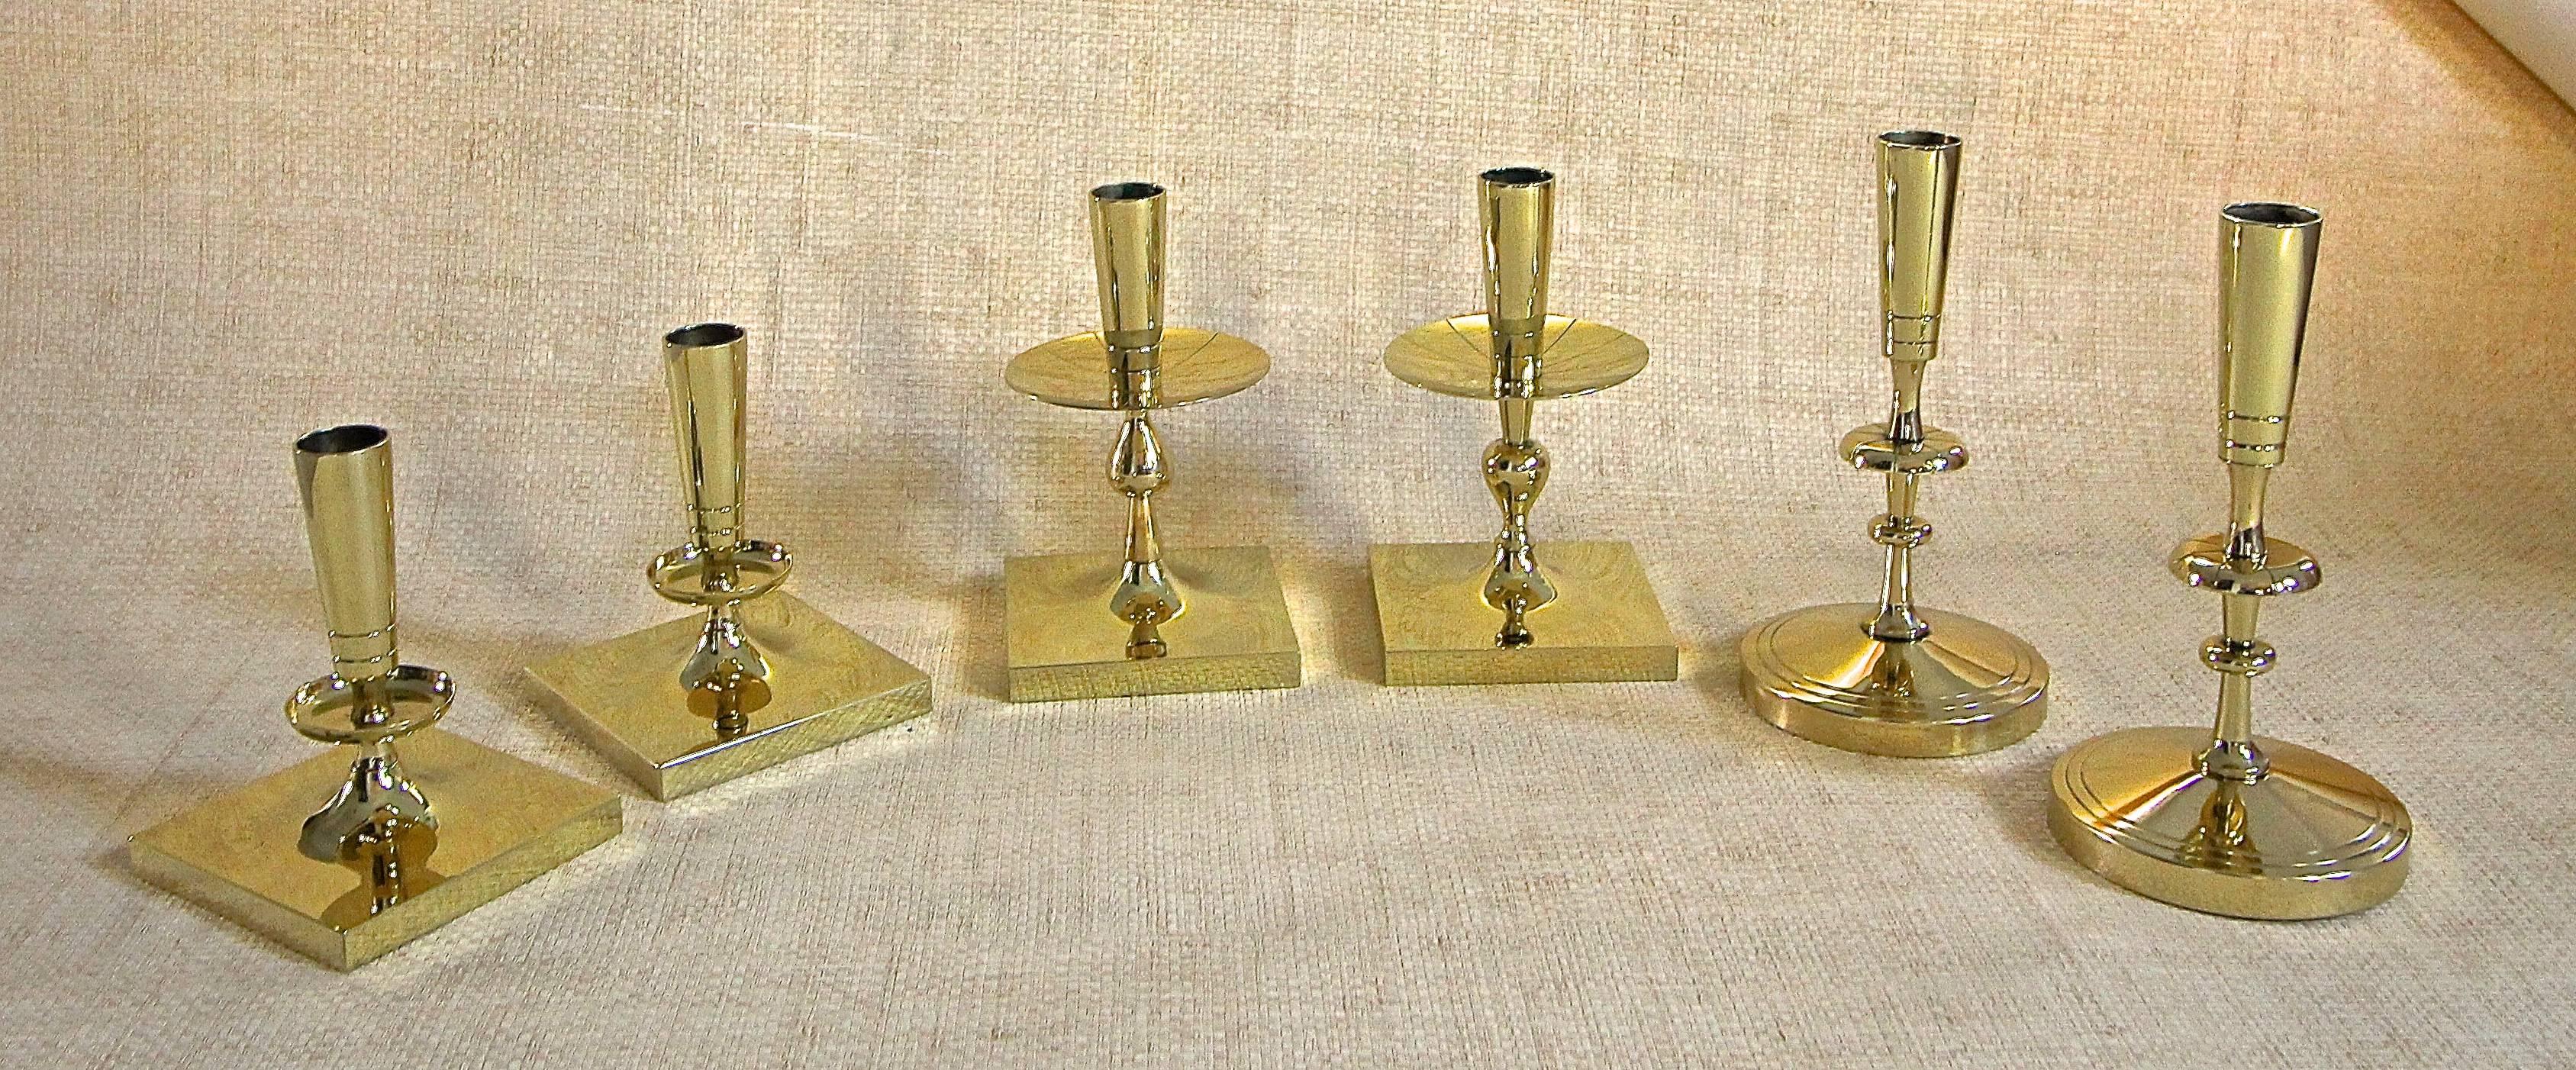 A collection of Tommi Parzinger brass candlesticks by Dorlyn Silversmiths, New York.

top left: 7